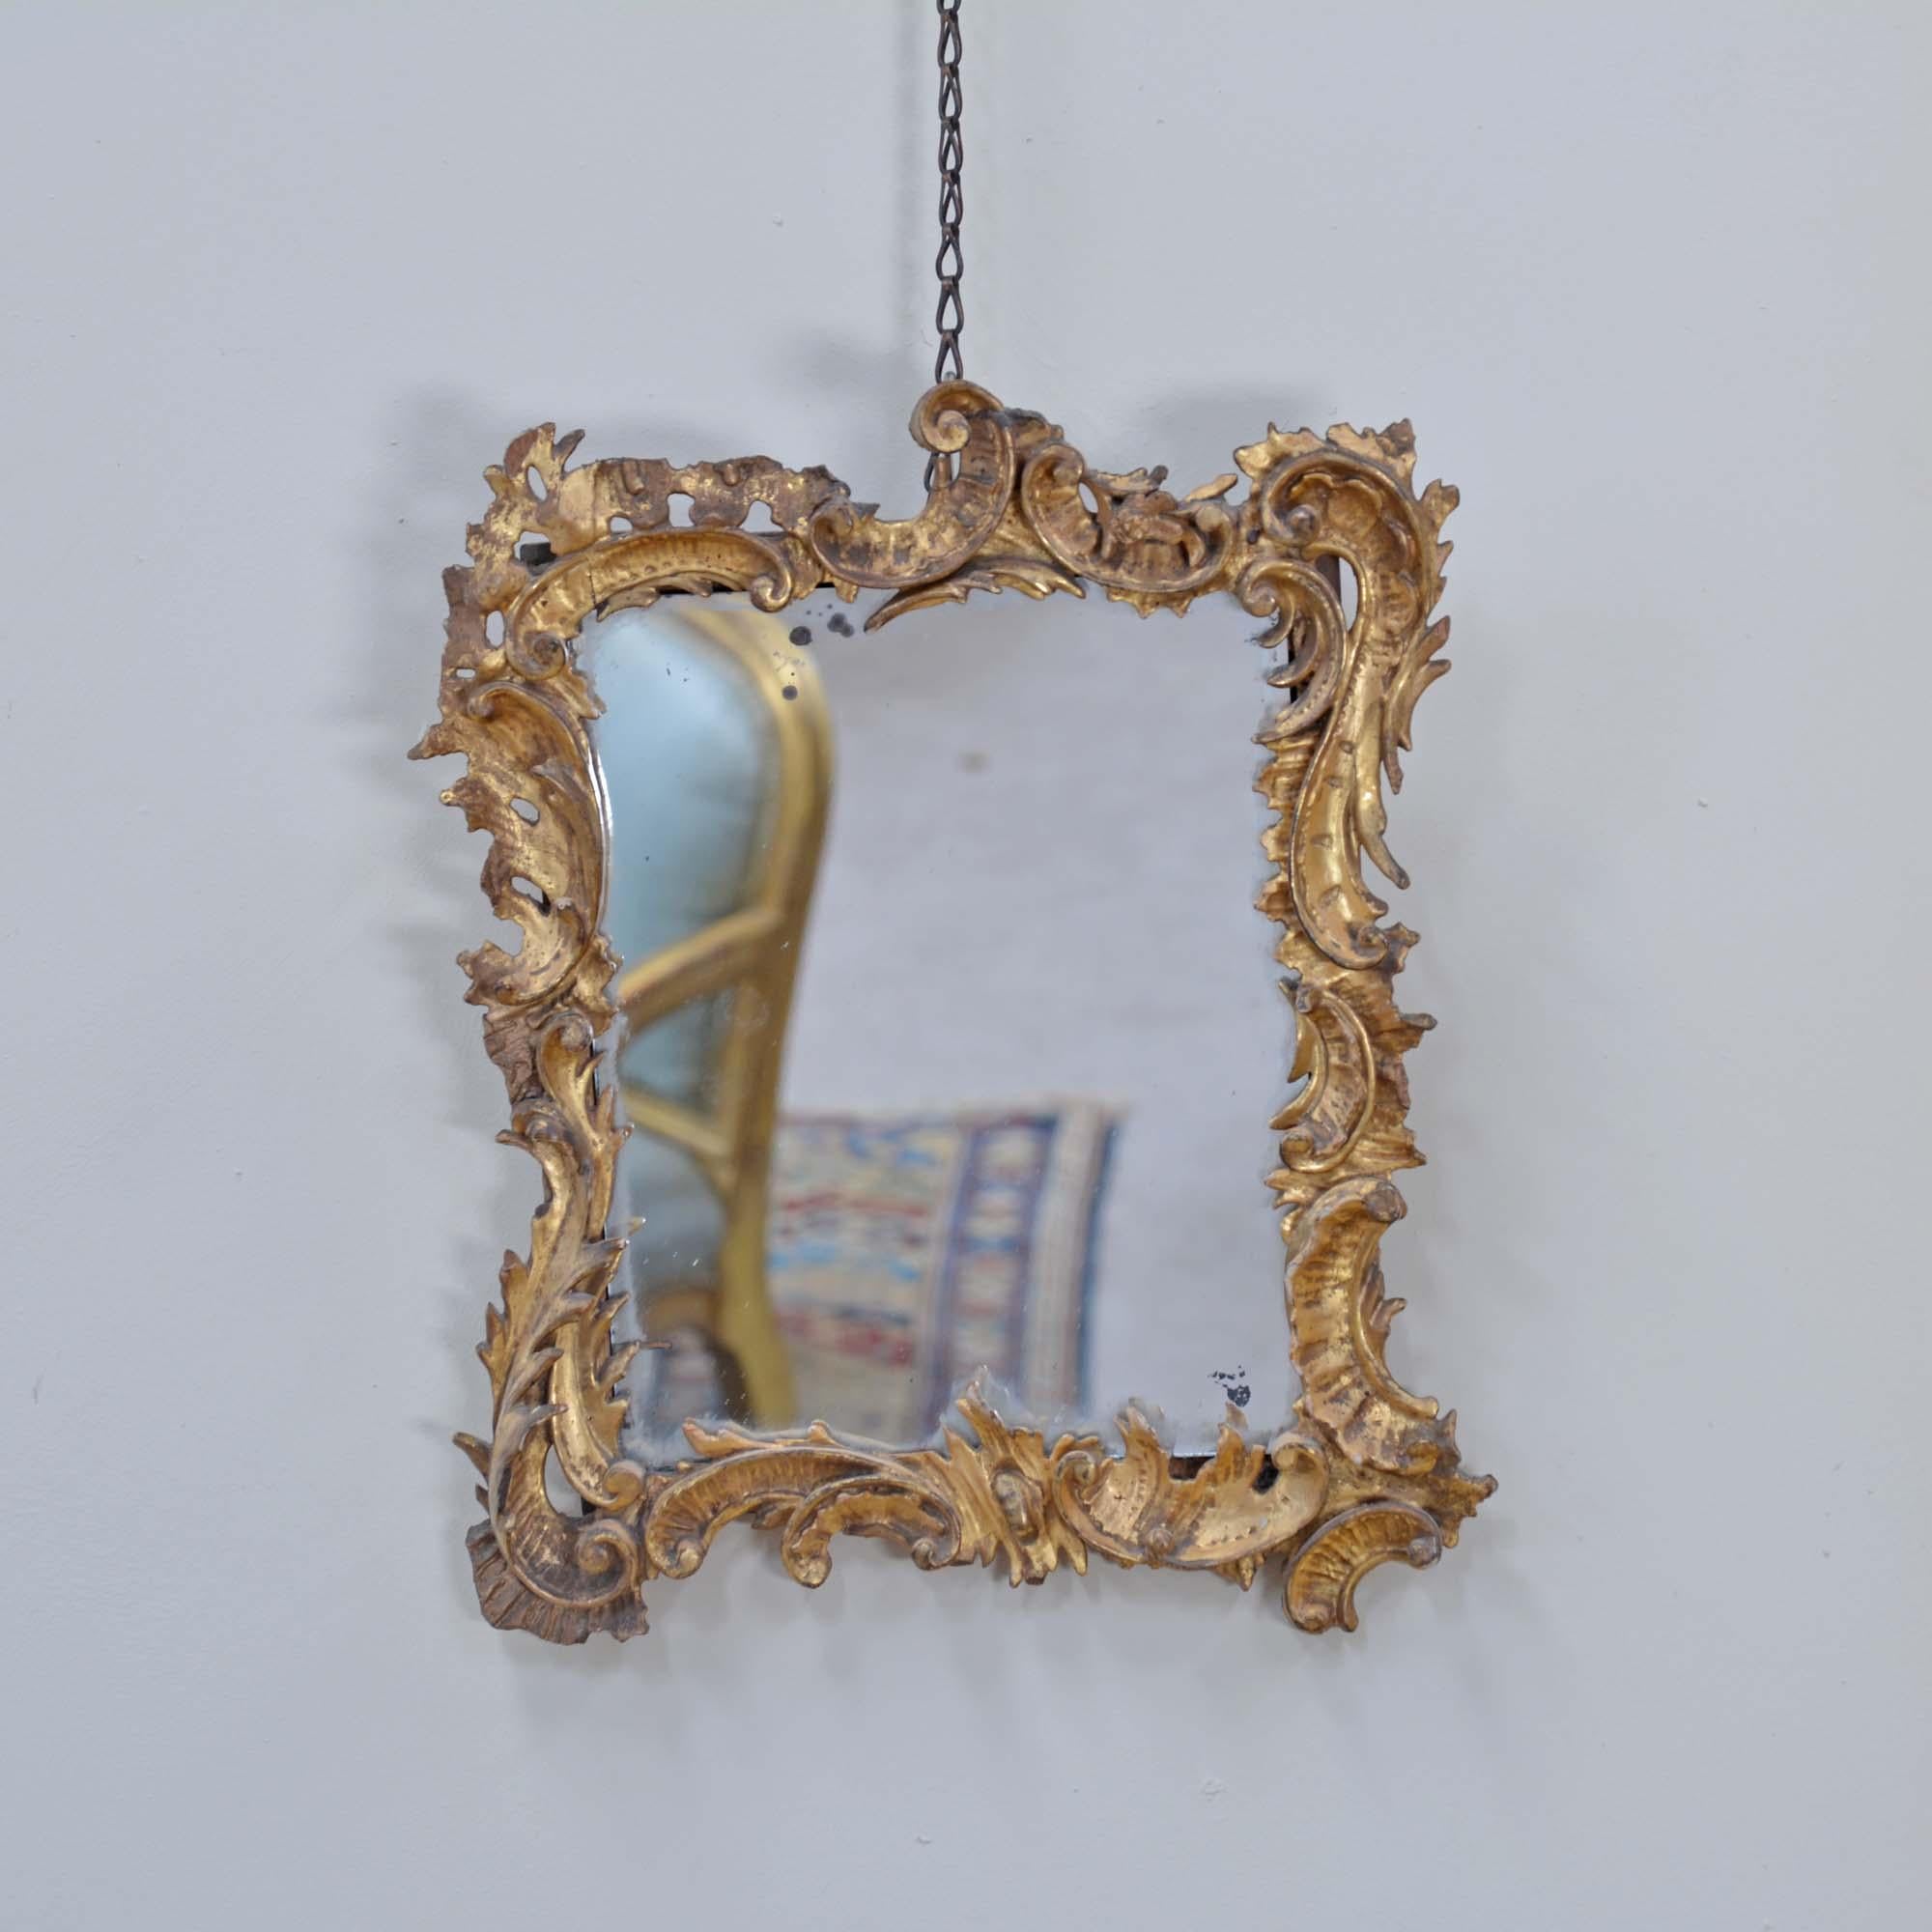 A small Georgian carved giltwood mirror with an asymmetrical carved wood foliate frame with C-scrolls in original water gilding. The mirror plate is later but with some character.
English, circa 1780

This mirror is carved wood rather than gesso